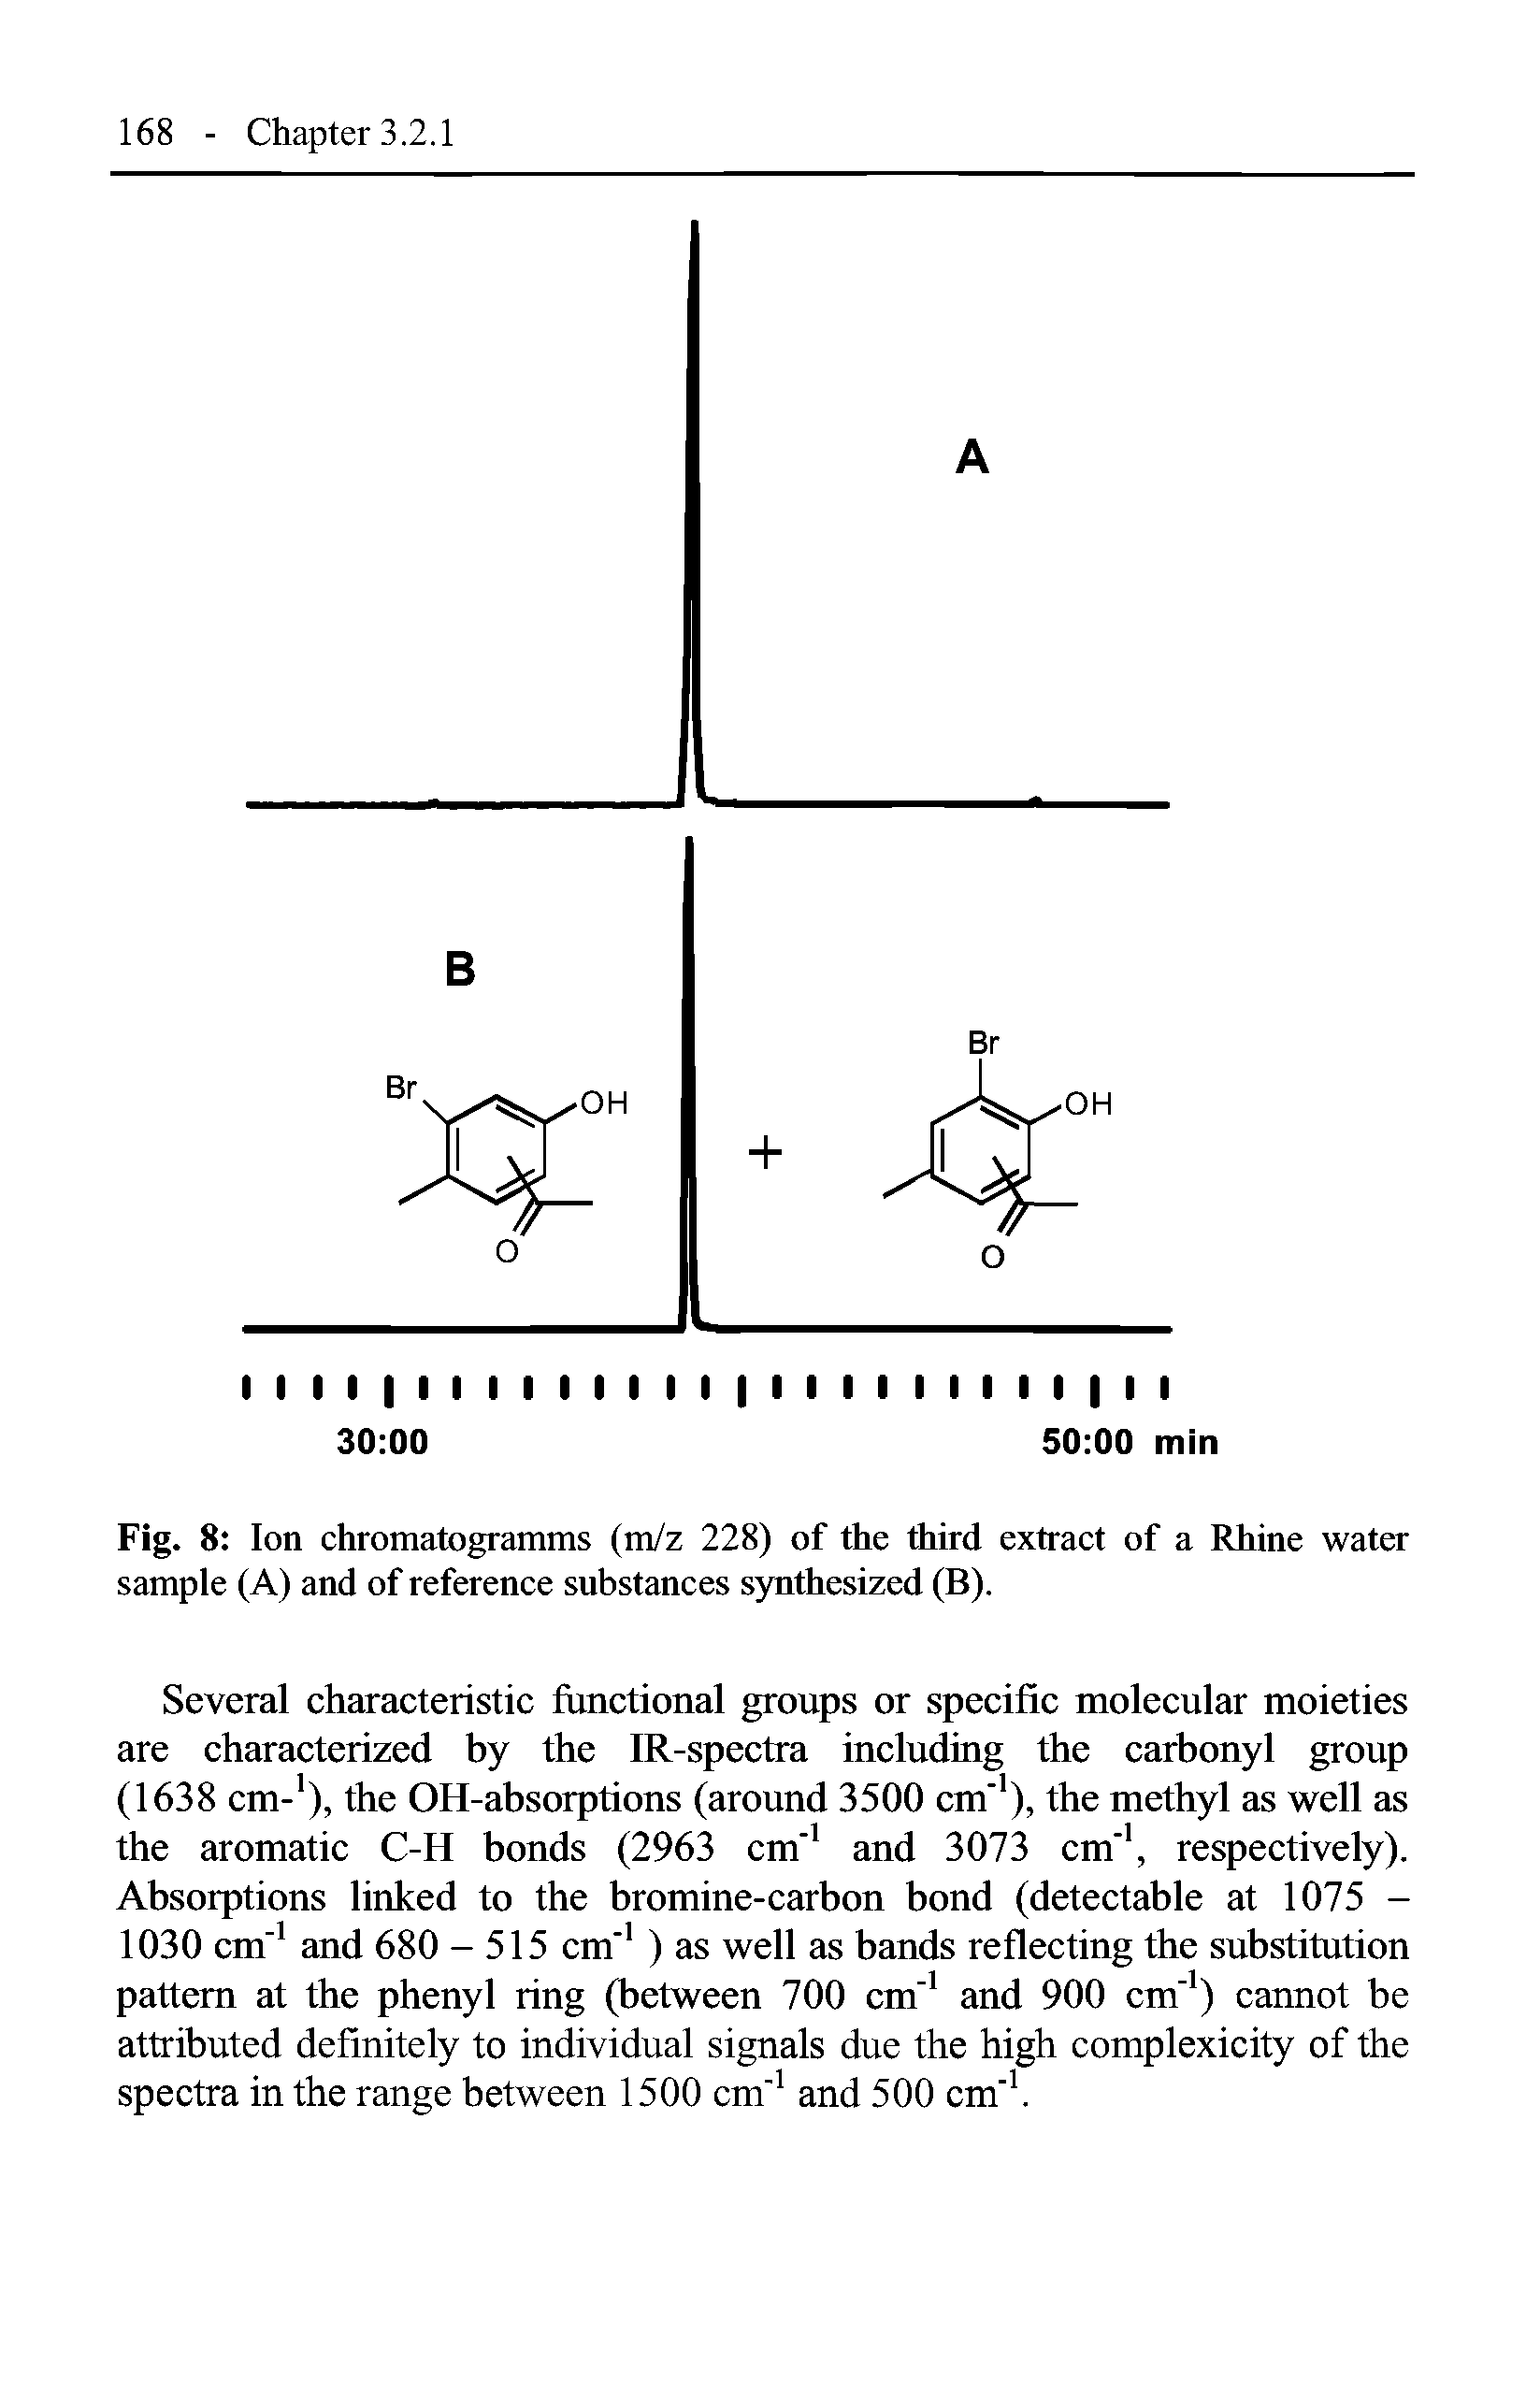 Fig. 8 Ion chromatogramms (m/z 228) of the third extract of a Rhine water sample (A) and of reference substances synthesized (B).